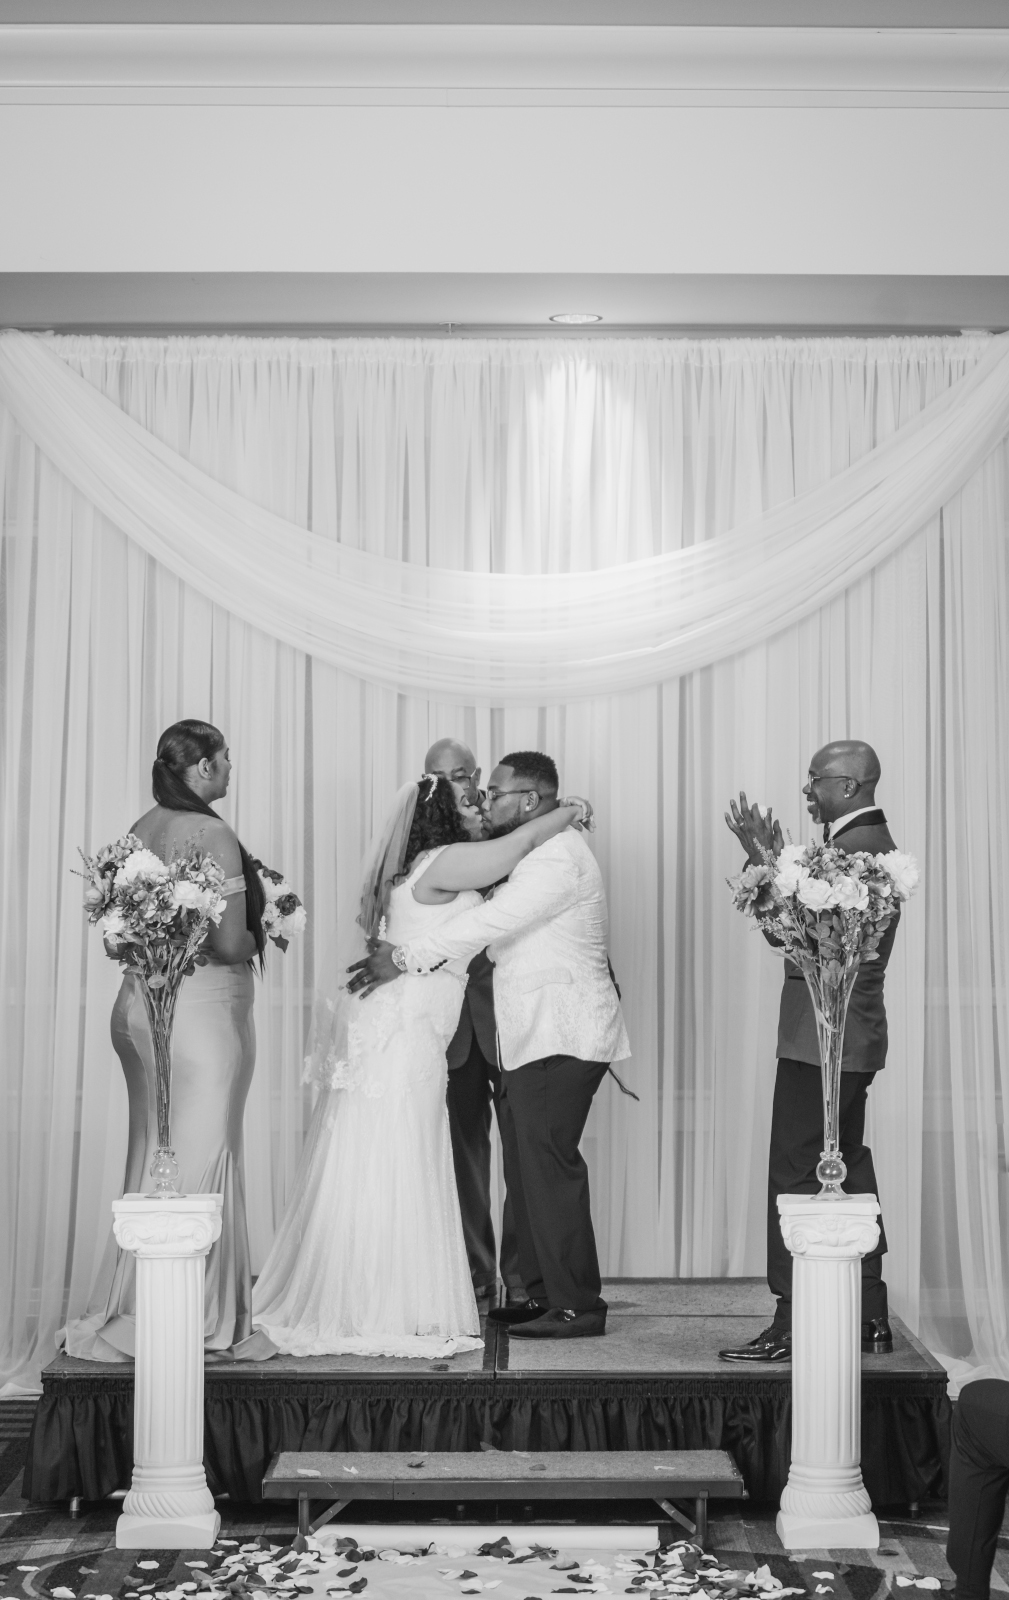 Bride and groom kiss, wedding ceremony, black and white wedding photo, father of the groom clapping, beautiful African American bride, African American wedding, romantic wedding ceremony at Hilton Akron/Fairlawn